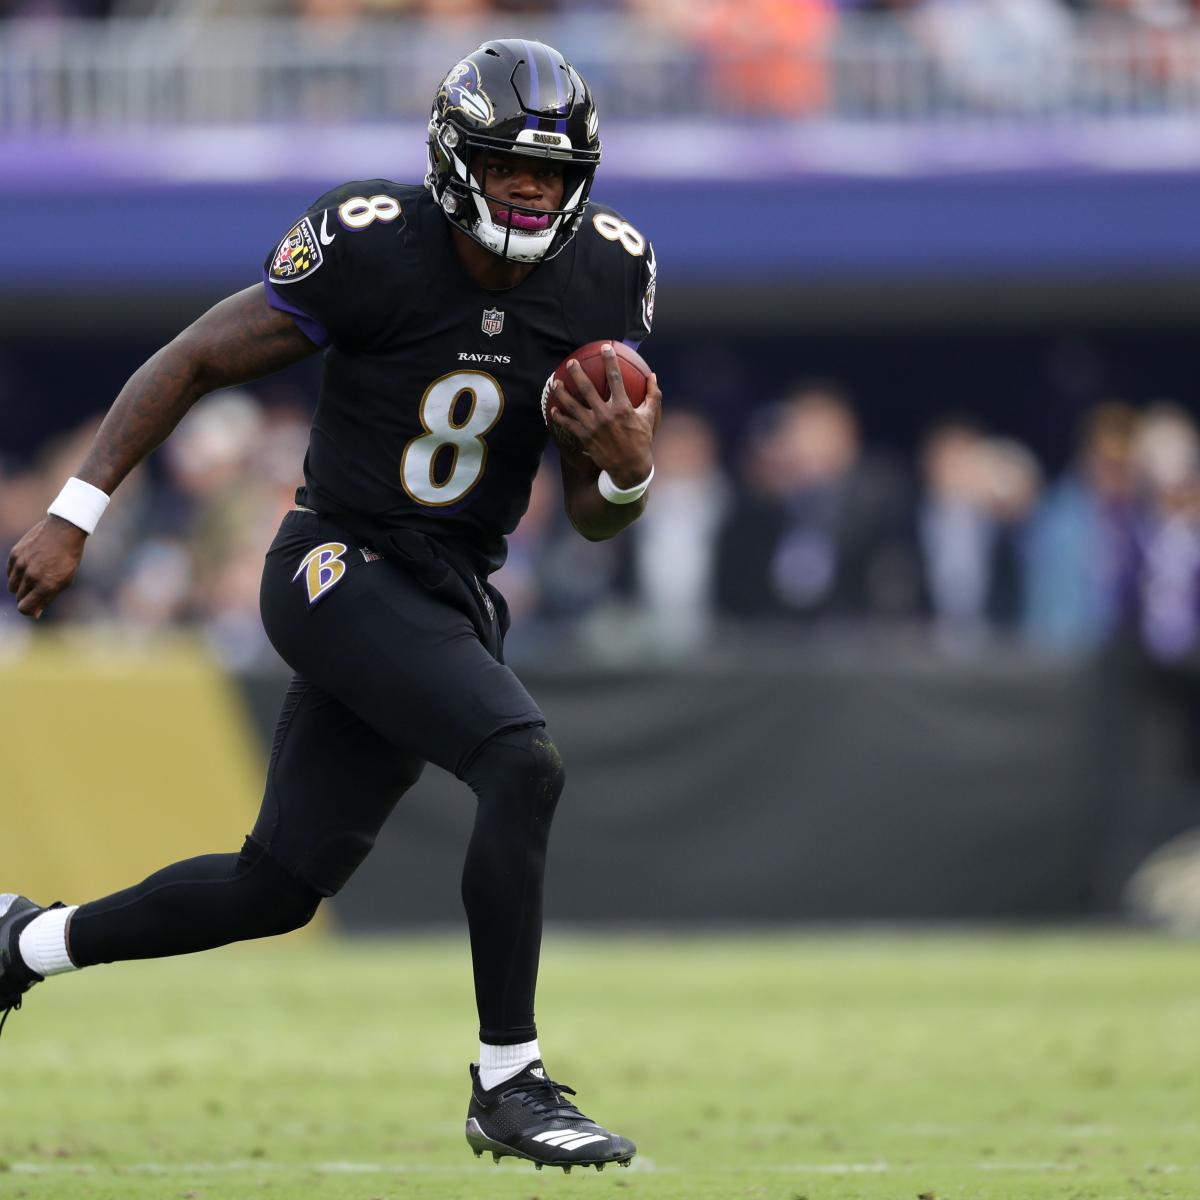 Highlights: Lamar Jackson Rushes for 117 Yards in 1st NFL Start, Win vs. Bengals ...